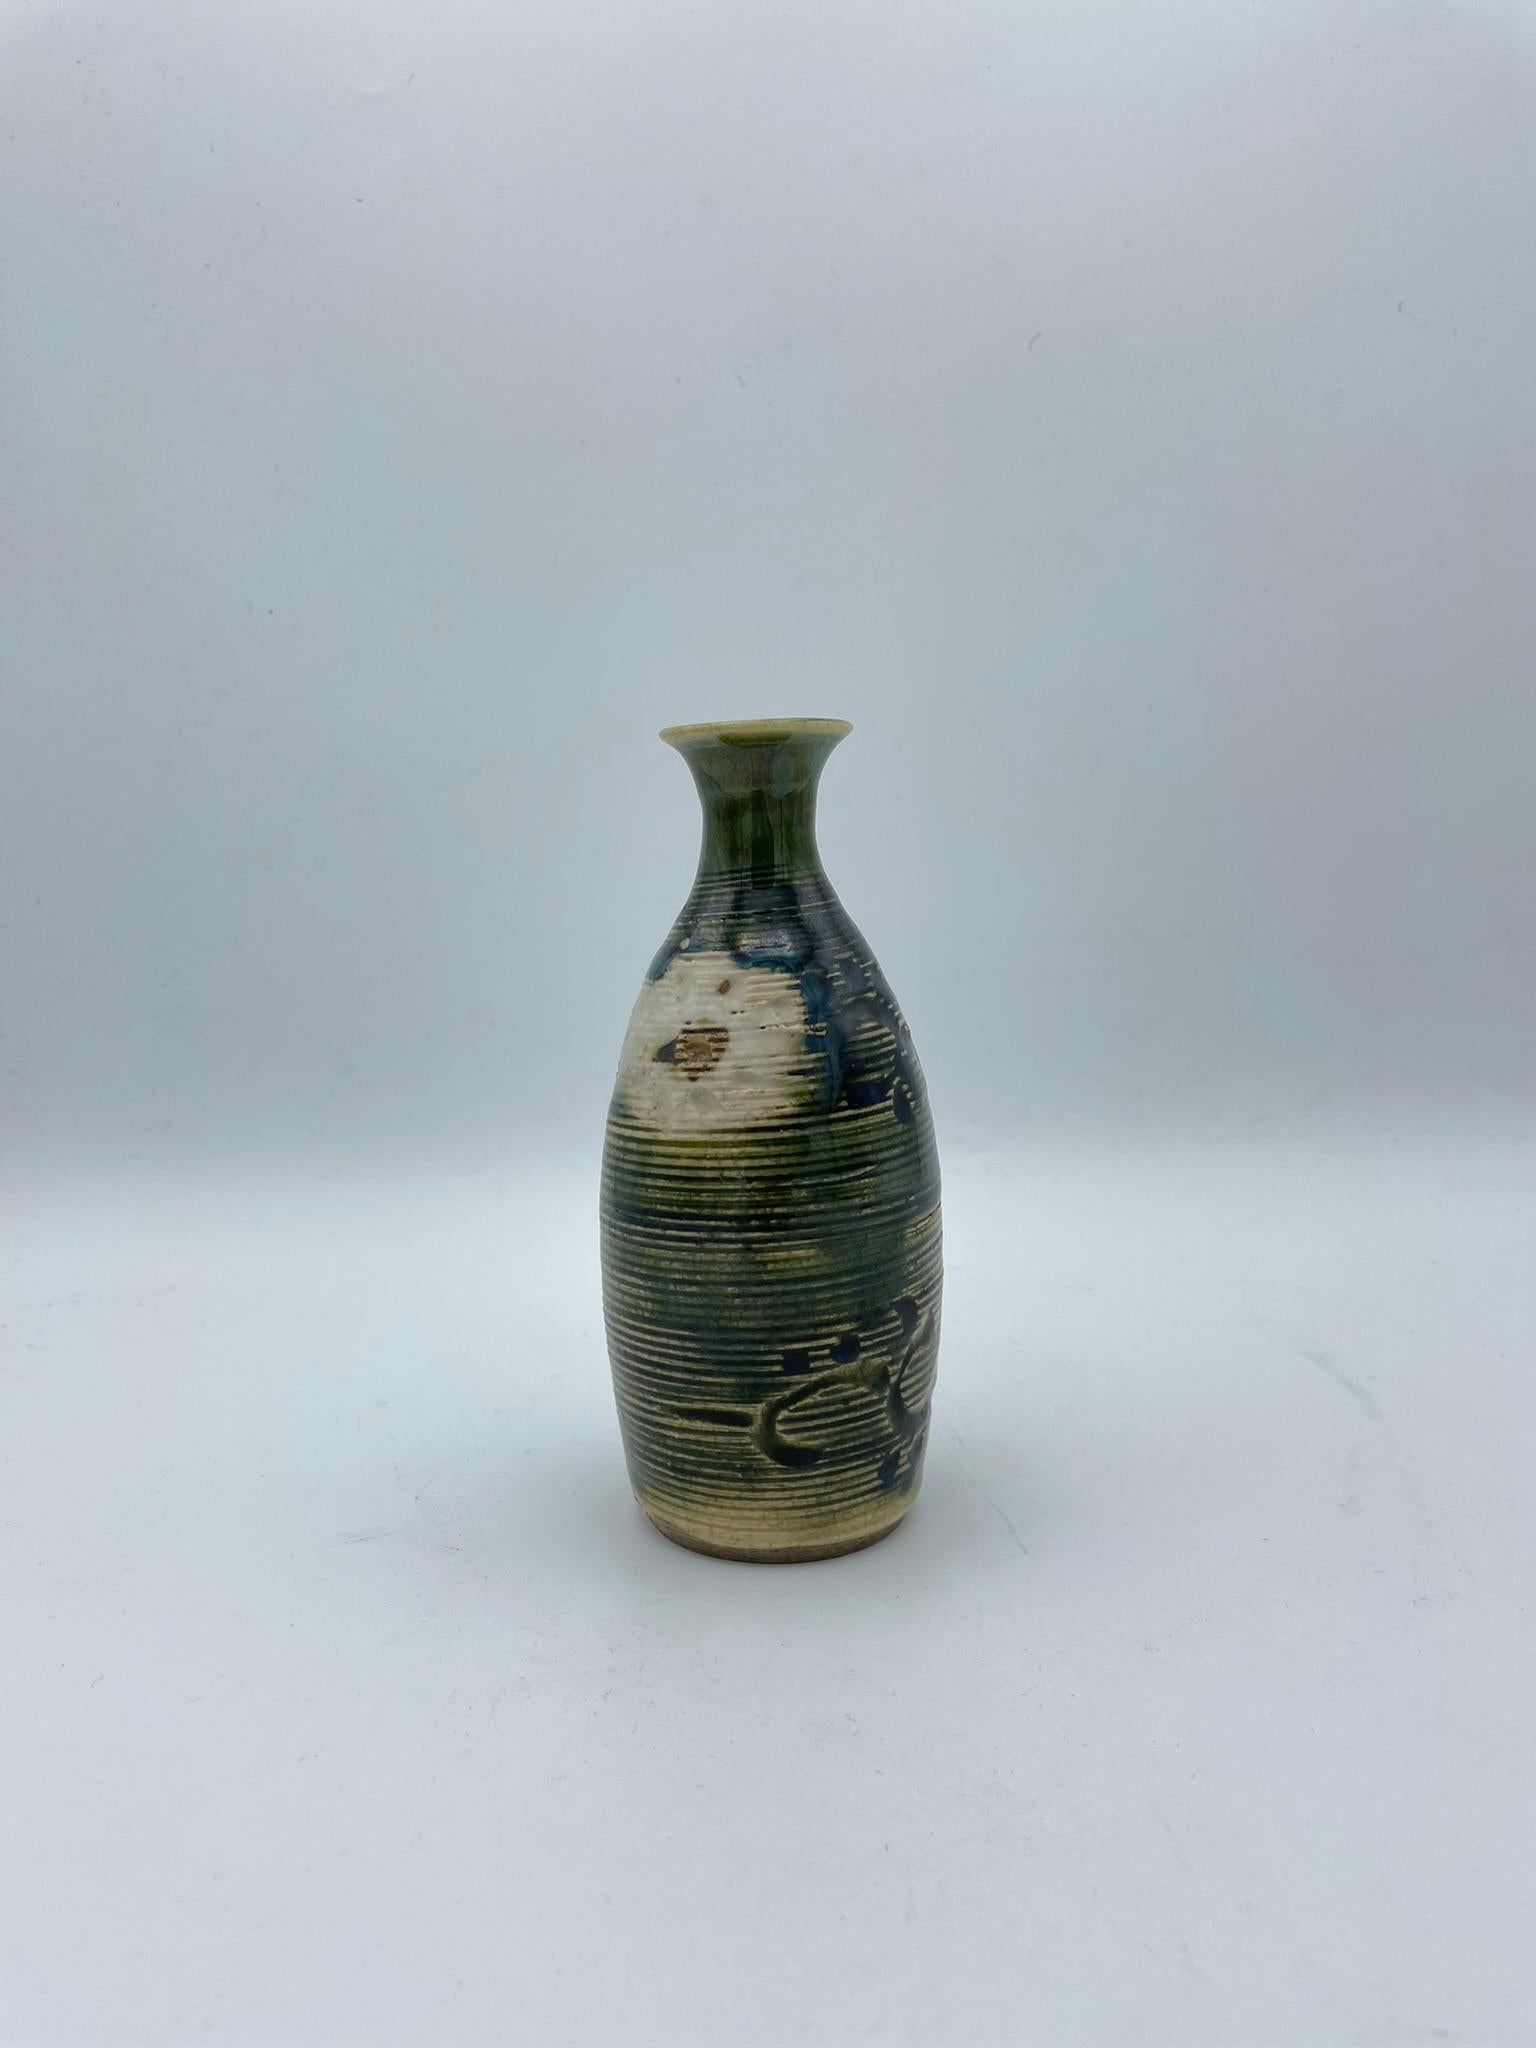 This is a bottle for sake called 'Tokkuri' in Japanese.
This tokkuri was made in Meiji era around 1900s.
It is made with porcelaine and made with style Oribe (Oribe ware/ Oribe yaki).

A style of Japanese pottery 'Oribe yaki' was first appeared